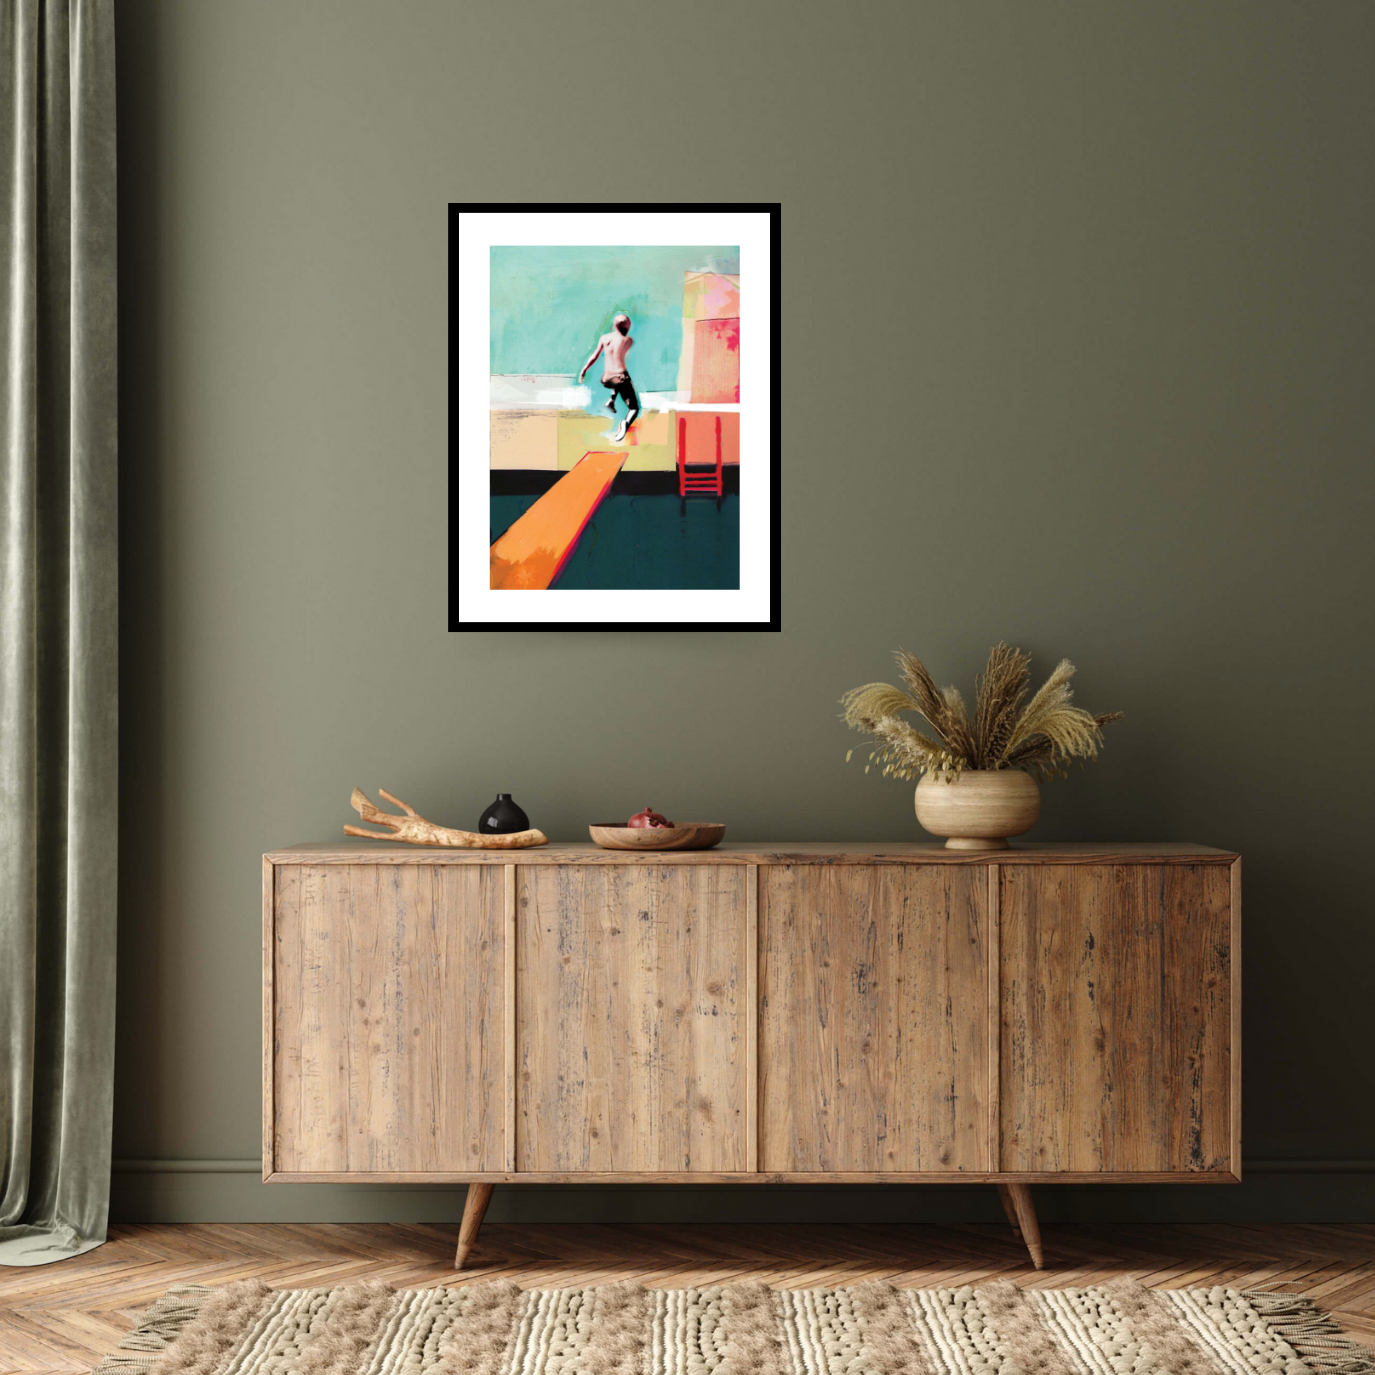 Dive into the vibrant world of 'Pool Day' by David McConochie: Set in an elegant interior a captivating black framed print featuring a young boy leaping into a pool from an orange diving board against a stunning cyan sky. Experience the joy of summer with this colourful fine art print